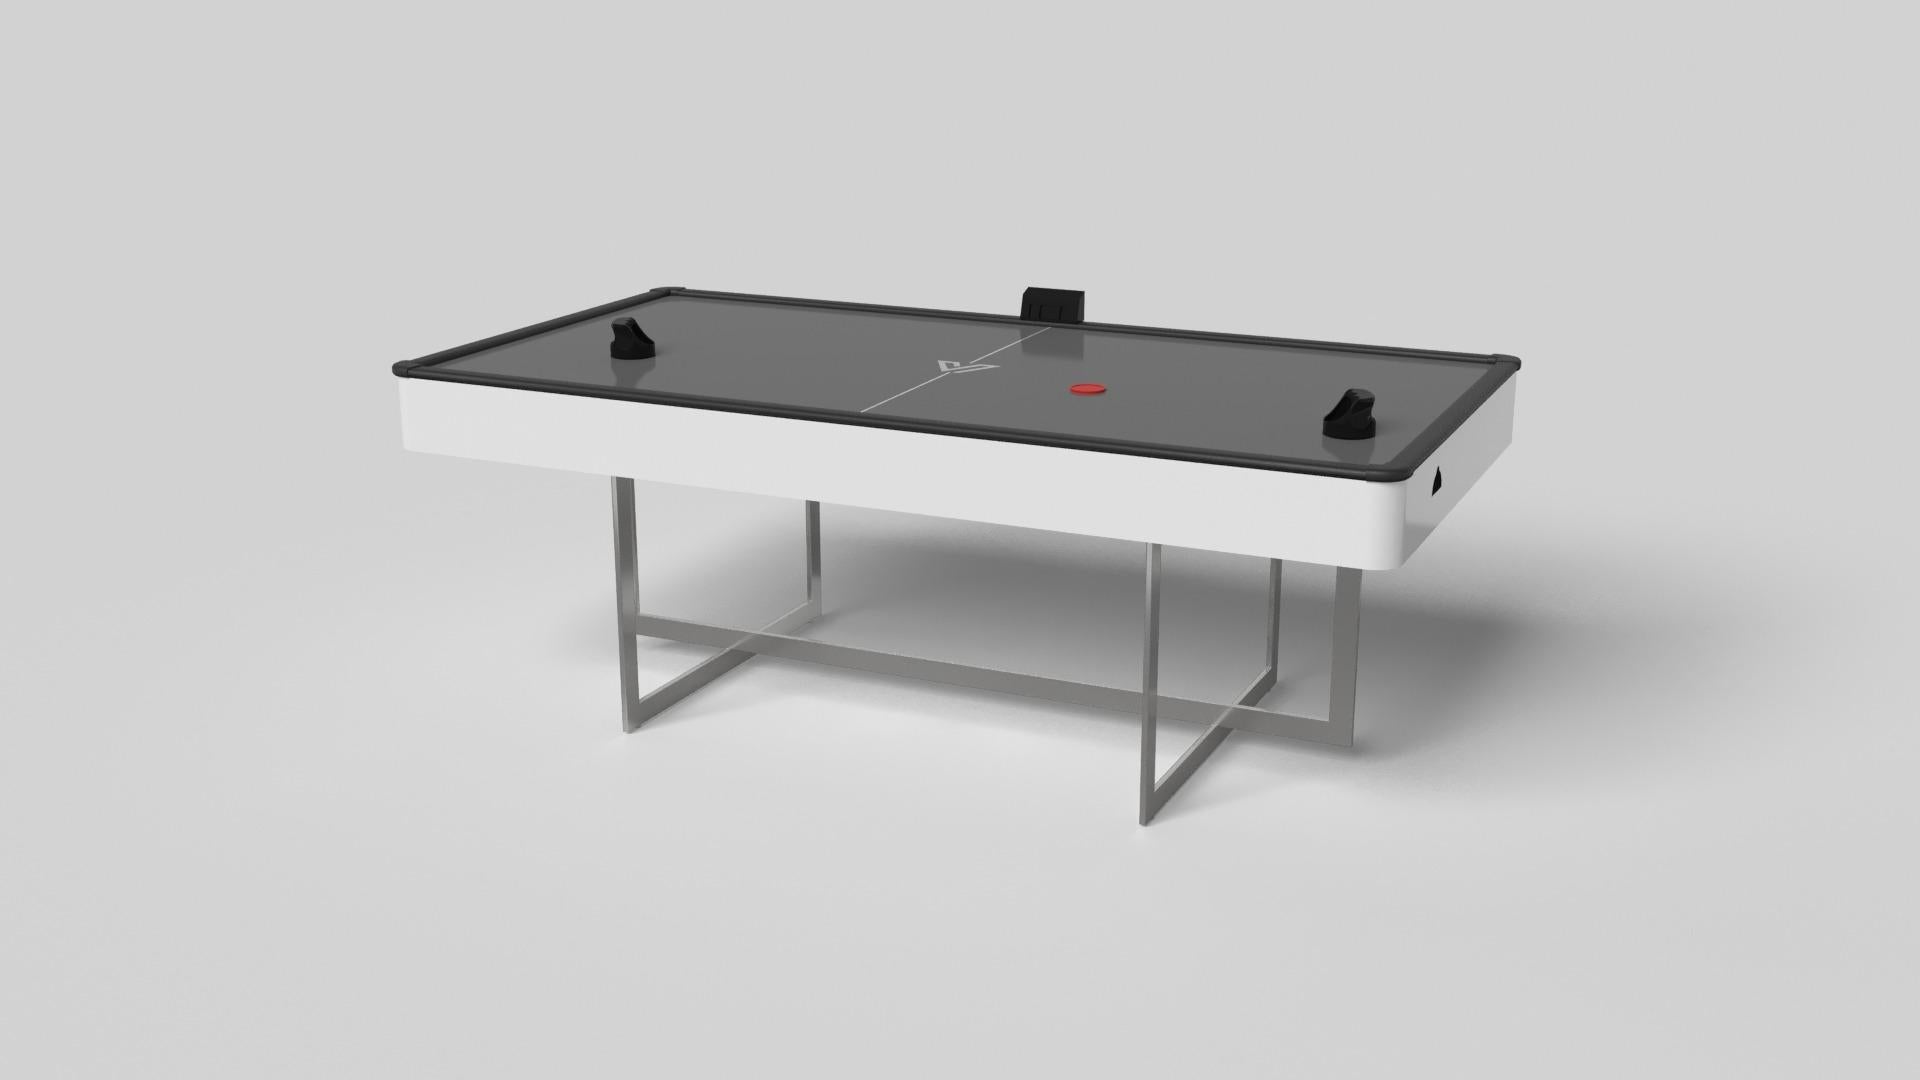 With an open metal foundation, our Beso table is a unique expression of contemporary forms and negative space. This air hockey table is handcrafted by our master artisans with a rectangle-in-rectangle base that echoes the angles and edges of a